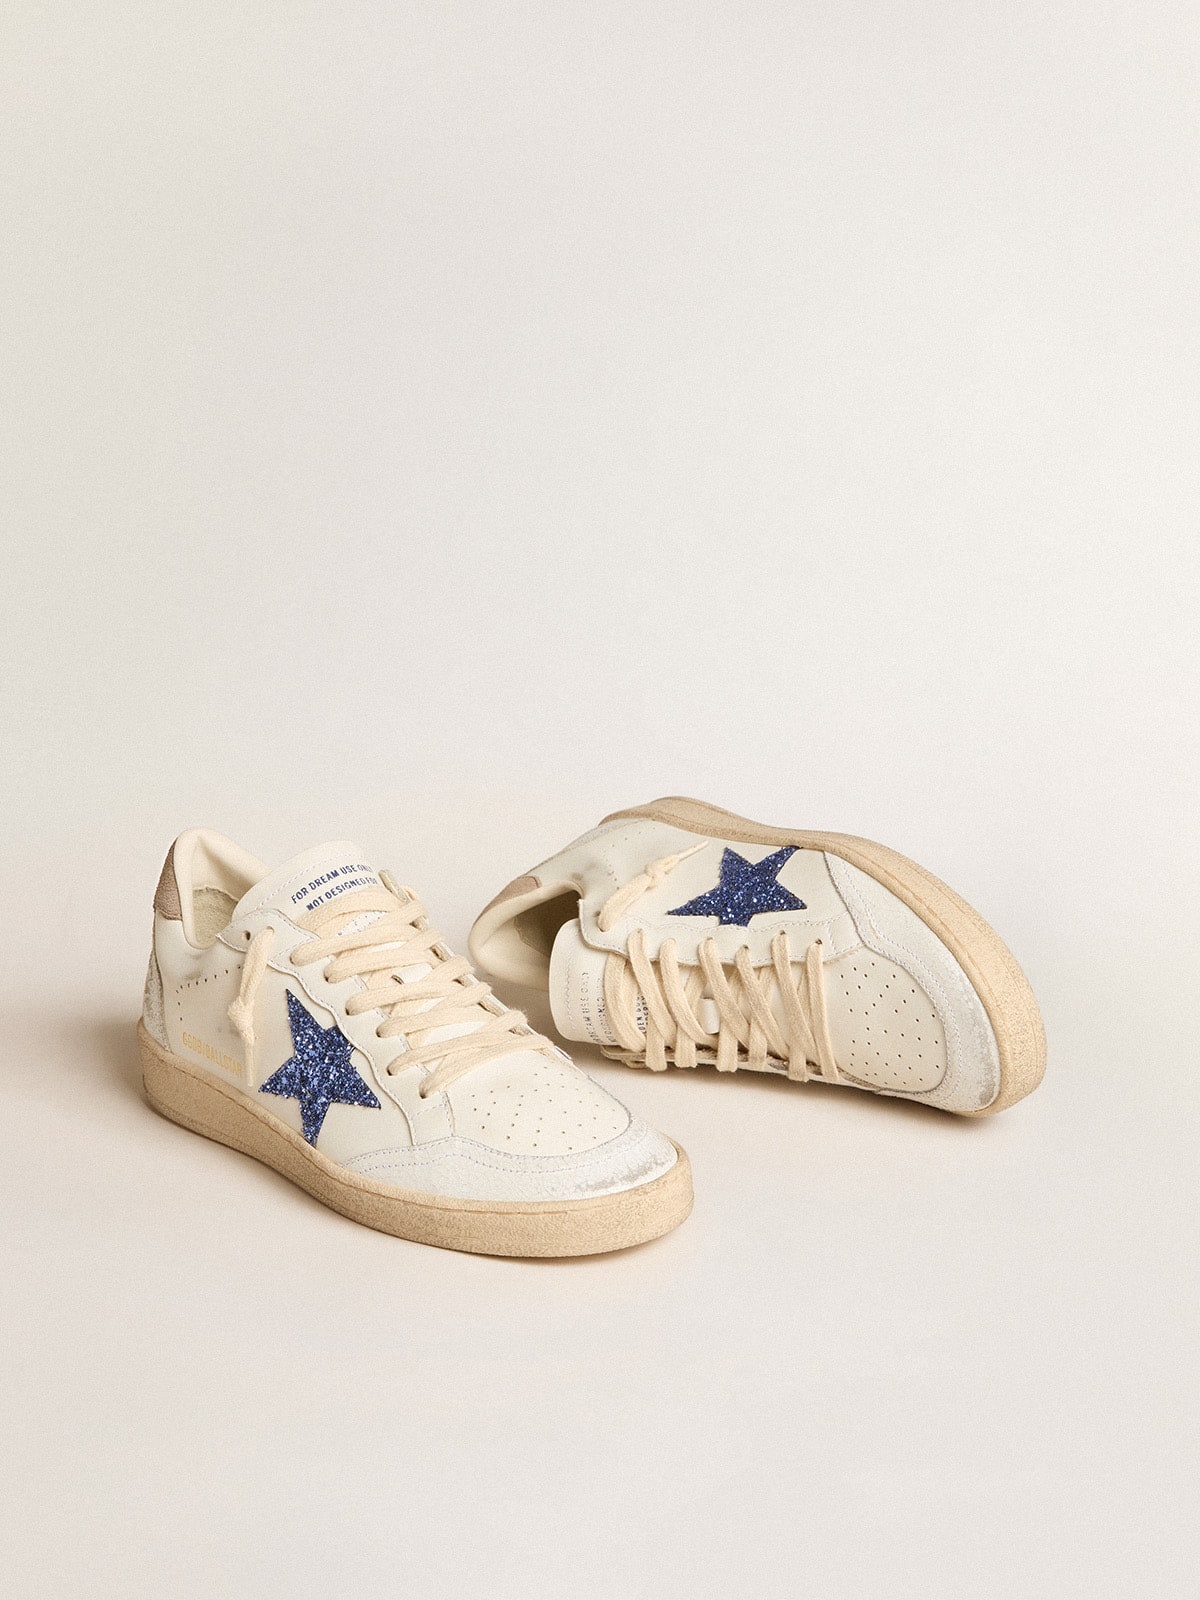 Ball Star with blue glitter star and dove-gray suede heel tab - 2